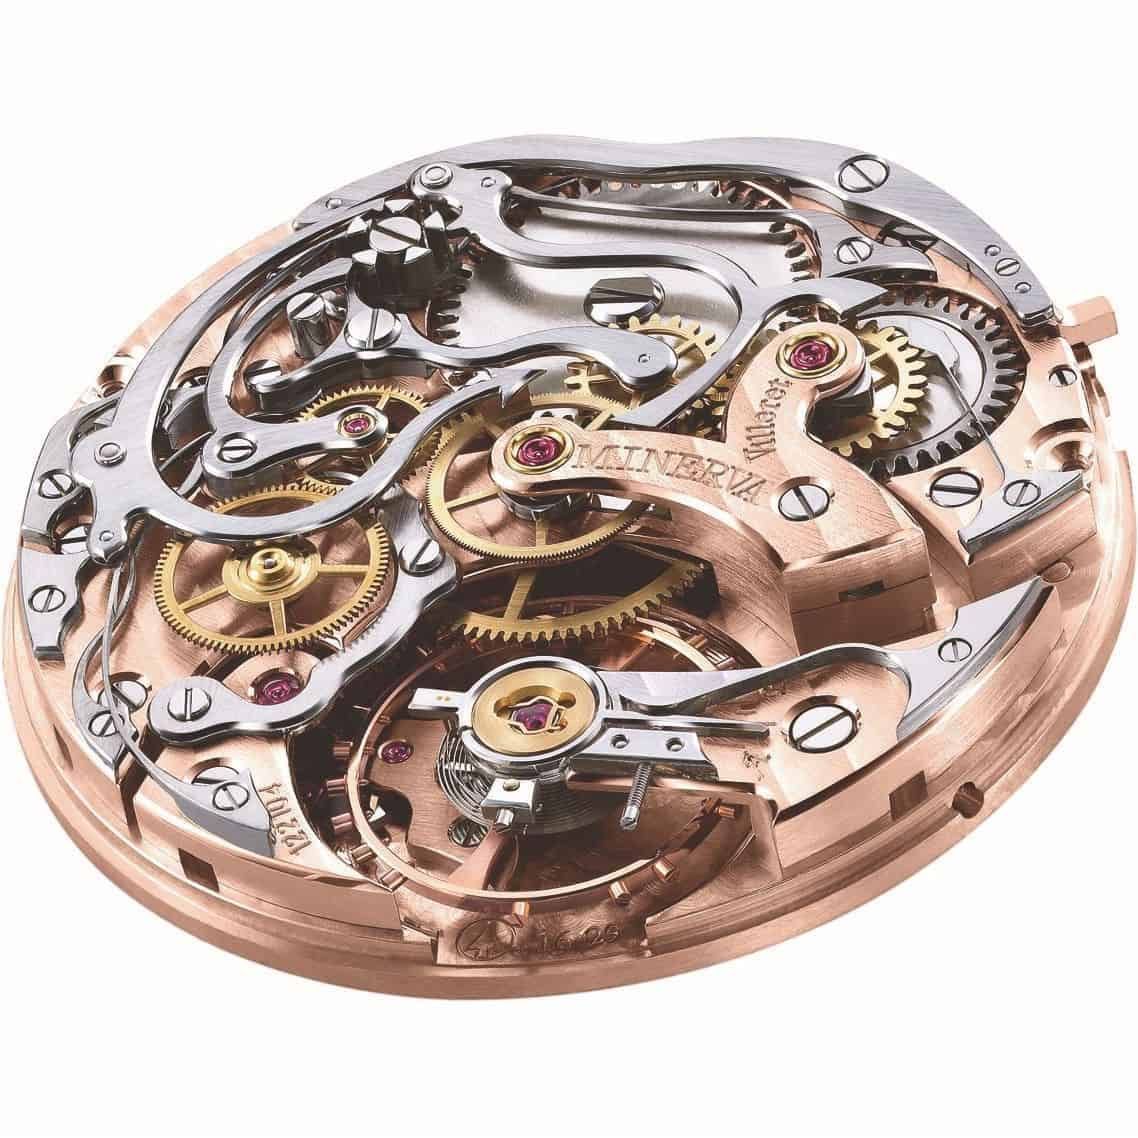  A close-up of a watch 